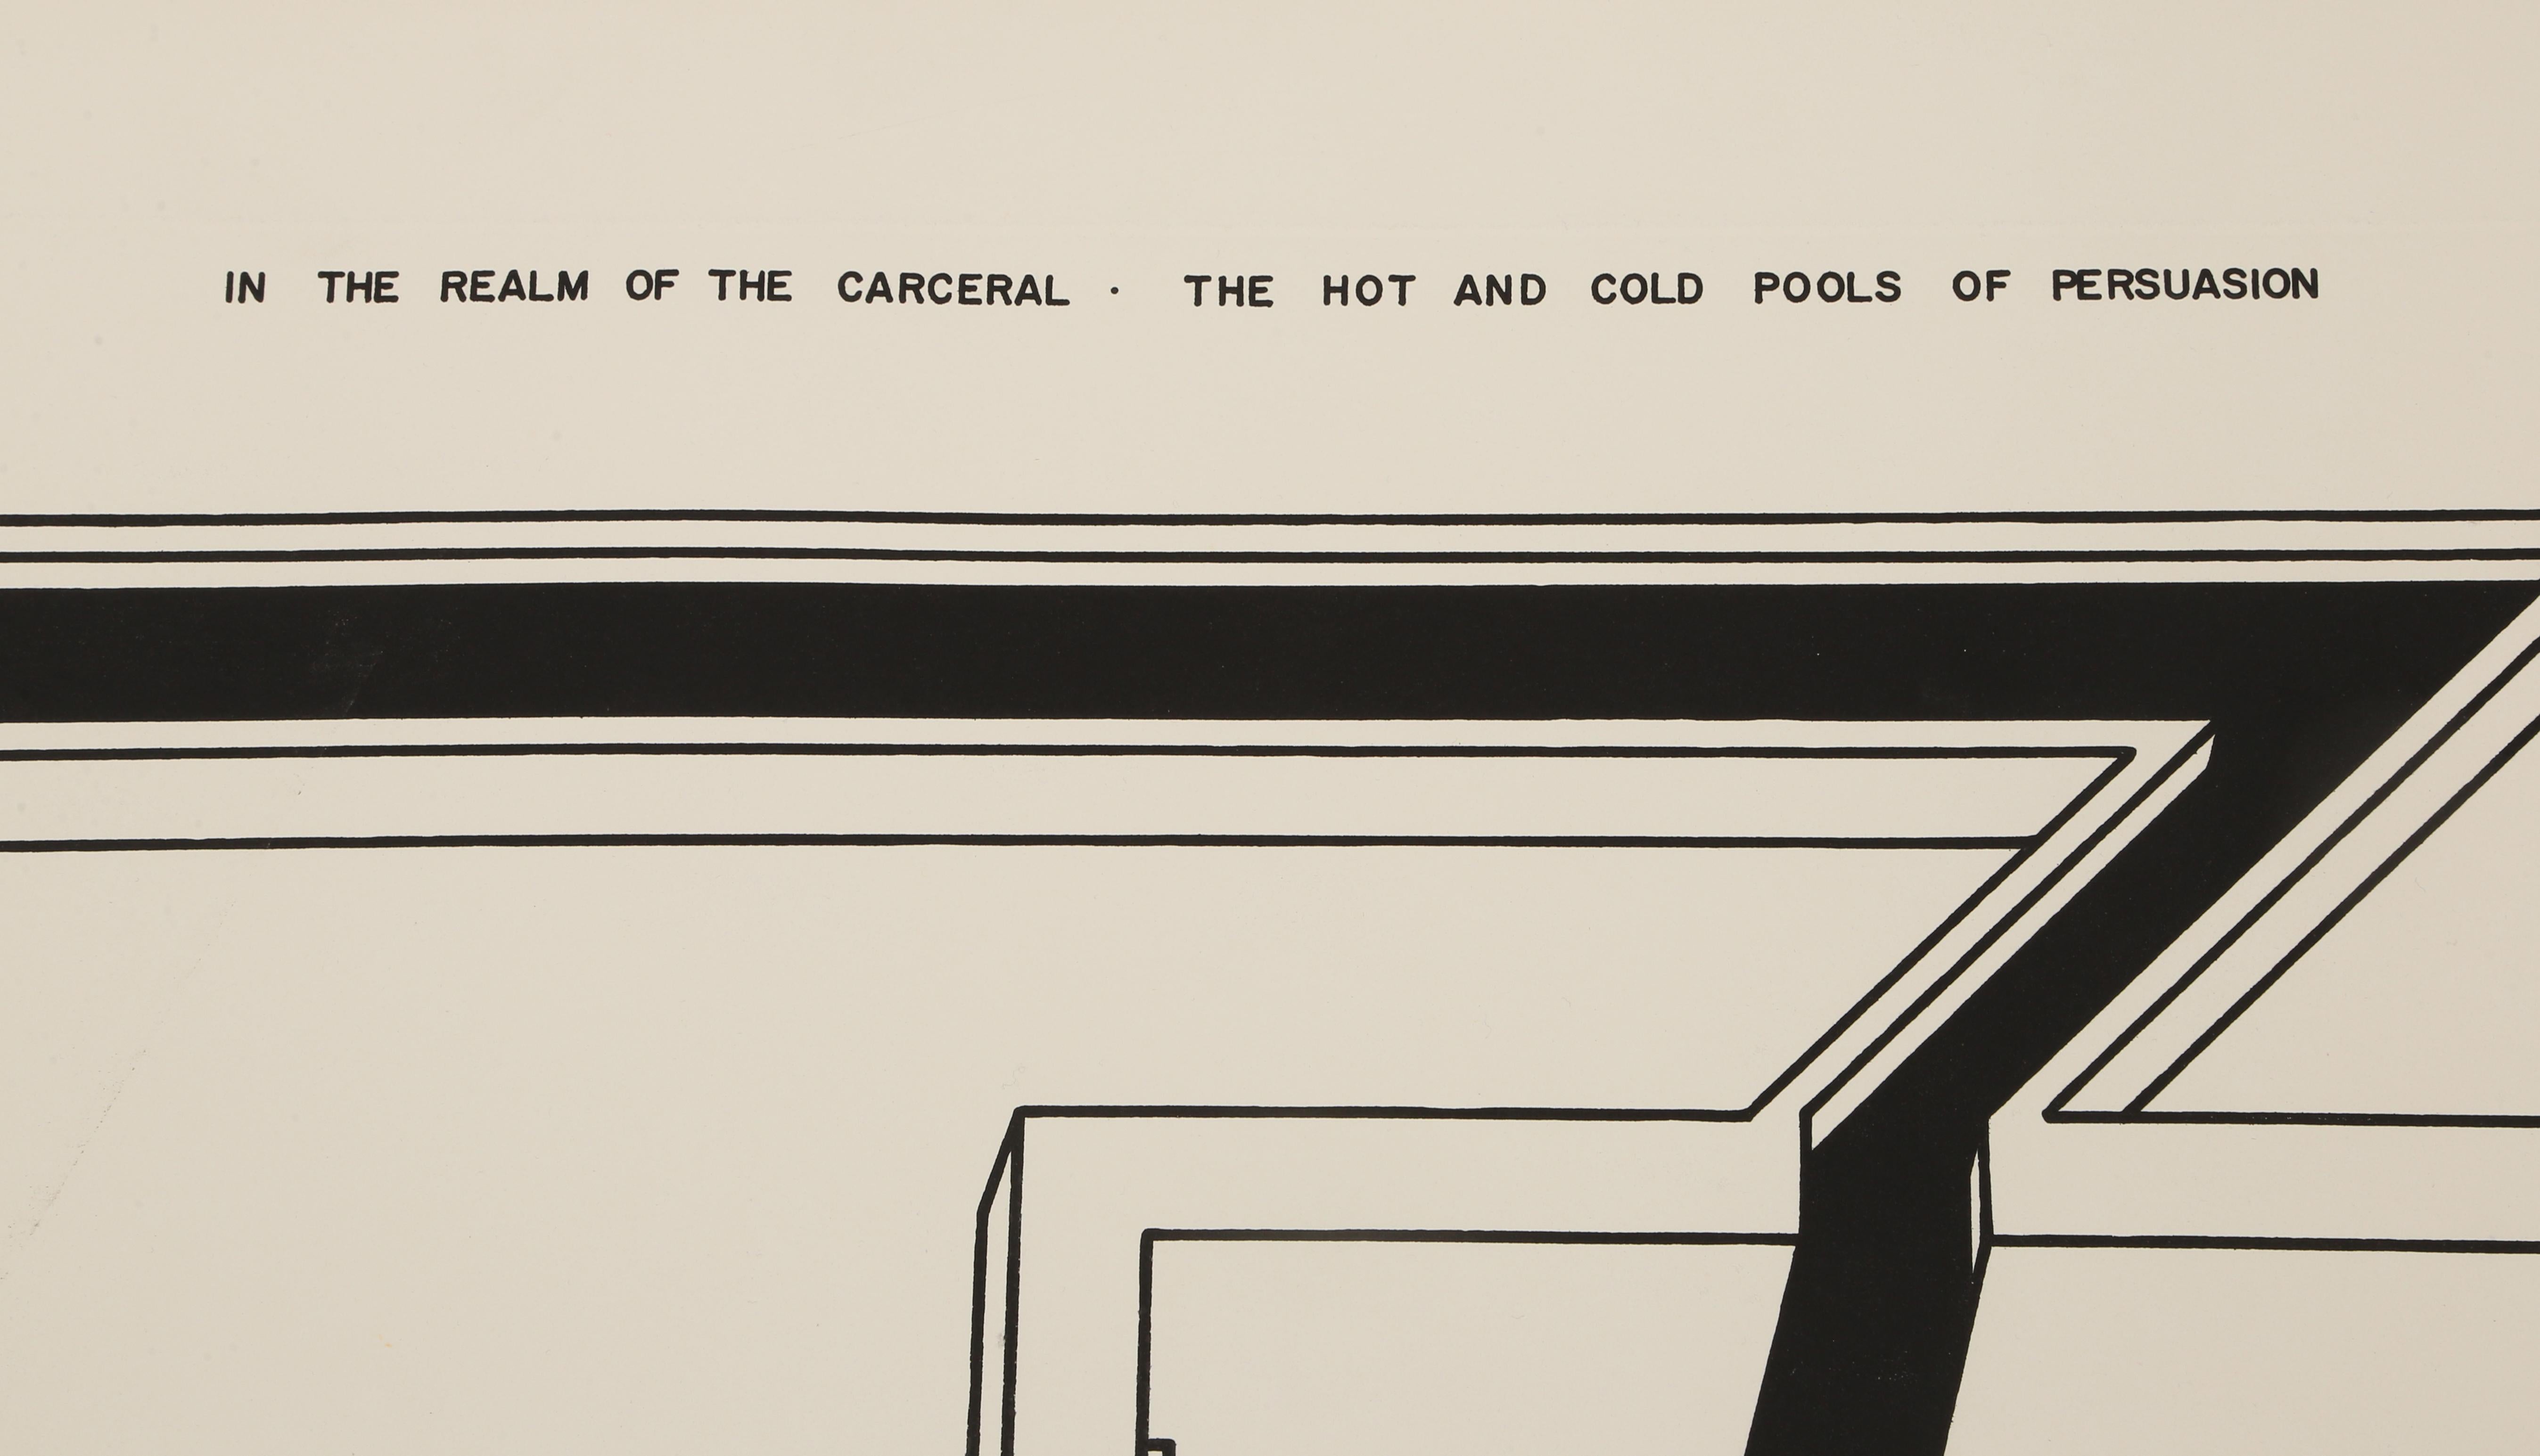 The Hot and Cold Pools of Persuasion from In the Realm of Carceral - White Abstract Print by Robert Morris